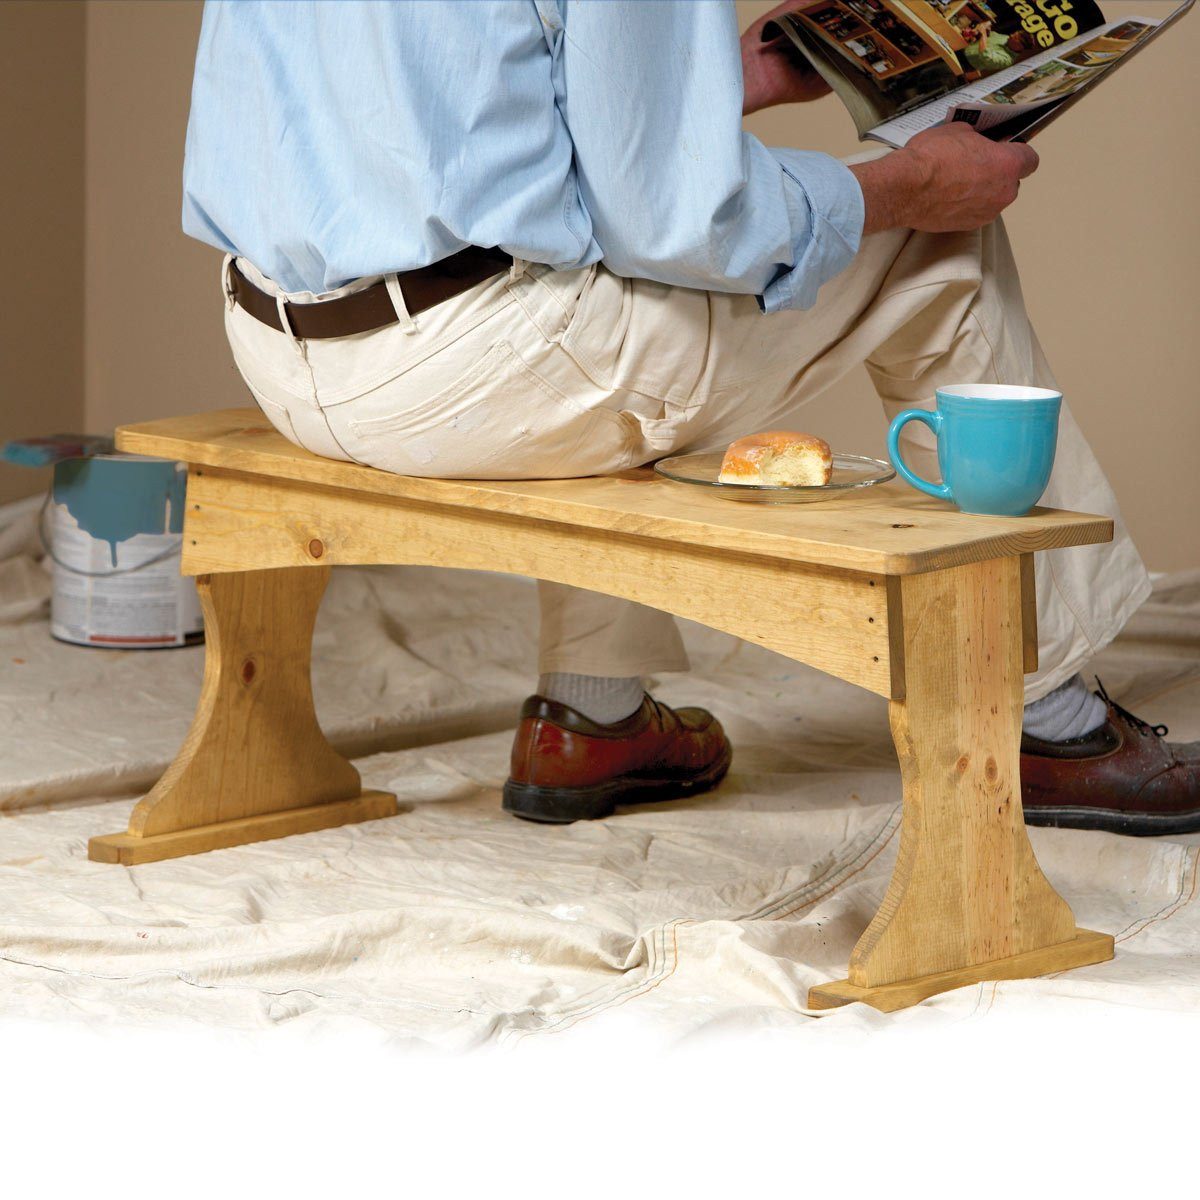 Wood Projects DIY
 The Top 10 DIY Wood Projects — The Family Handyman